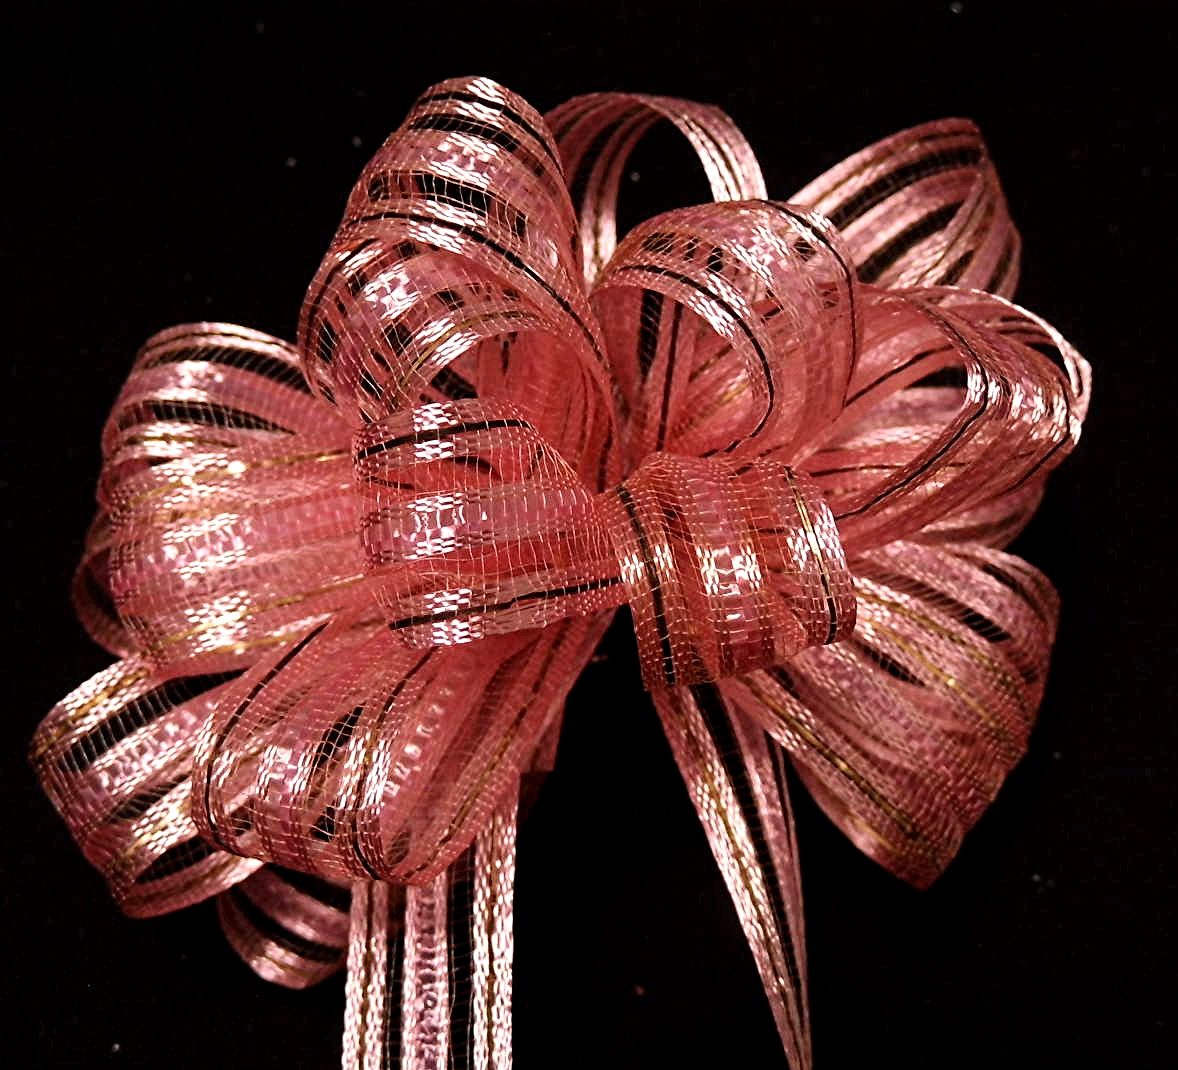 Strawberry Ribbon from American Ribbon Manufacturers